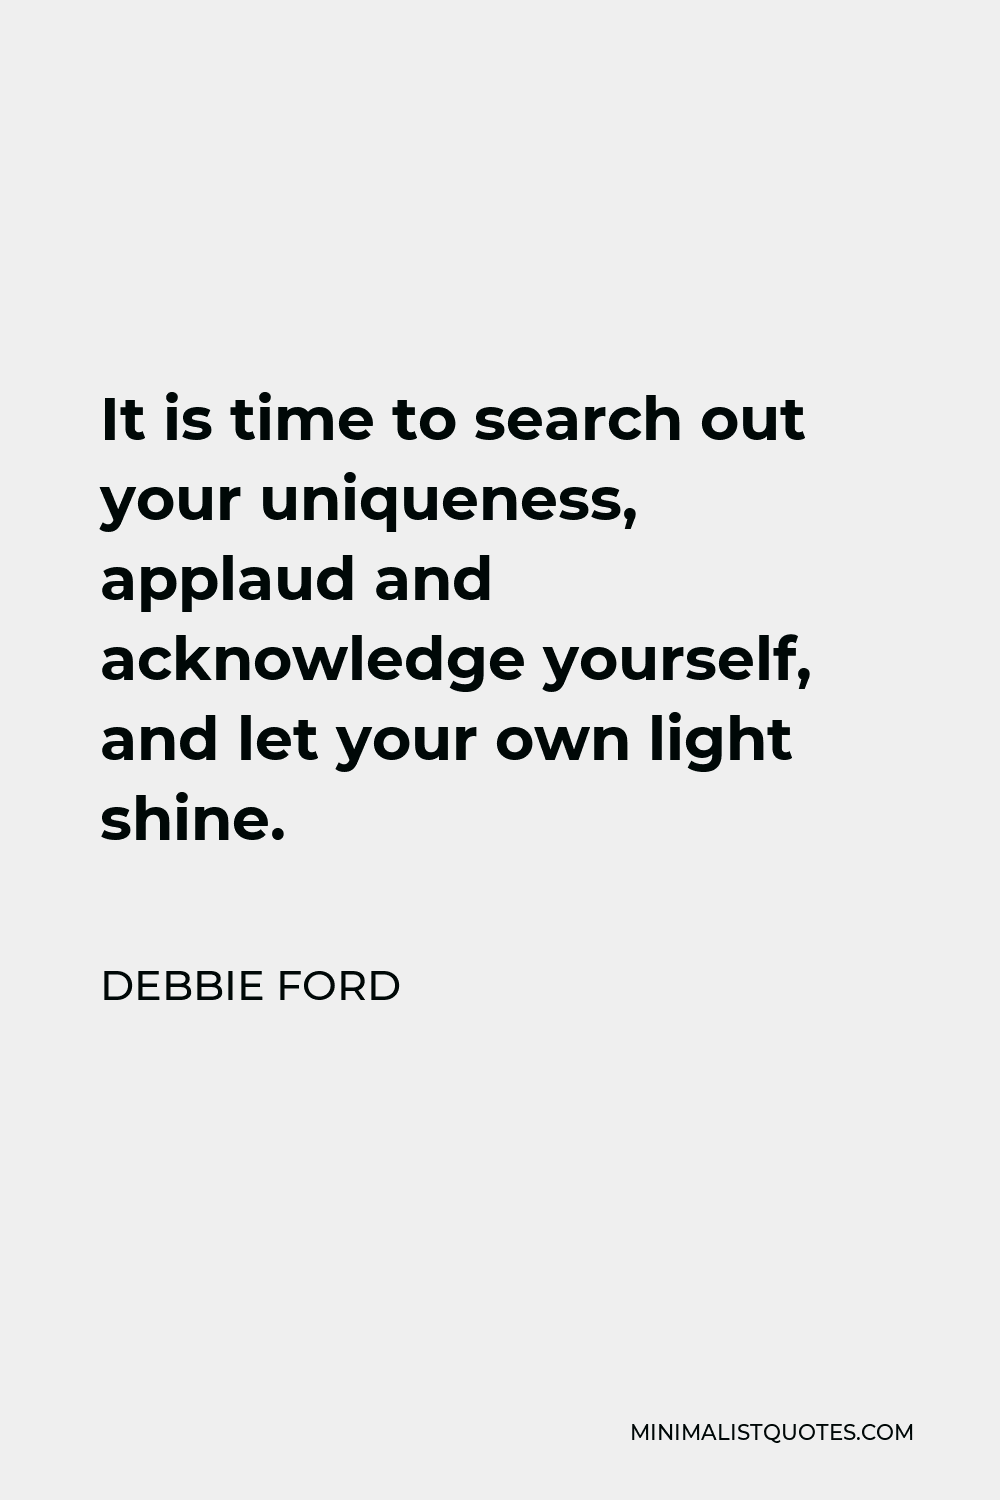 Debbie Ford Quote - It is time to search out your uniqueness, applaud and acknowledge yourself, and let your own light shine.